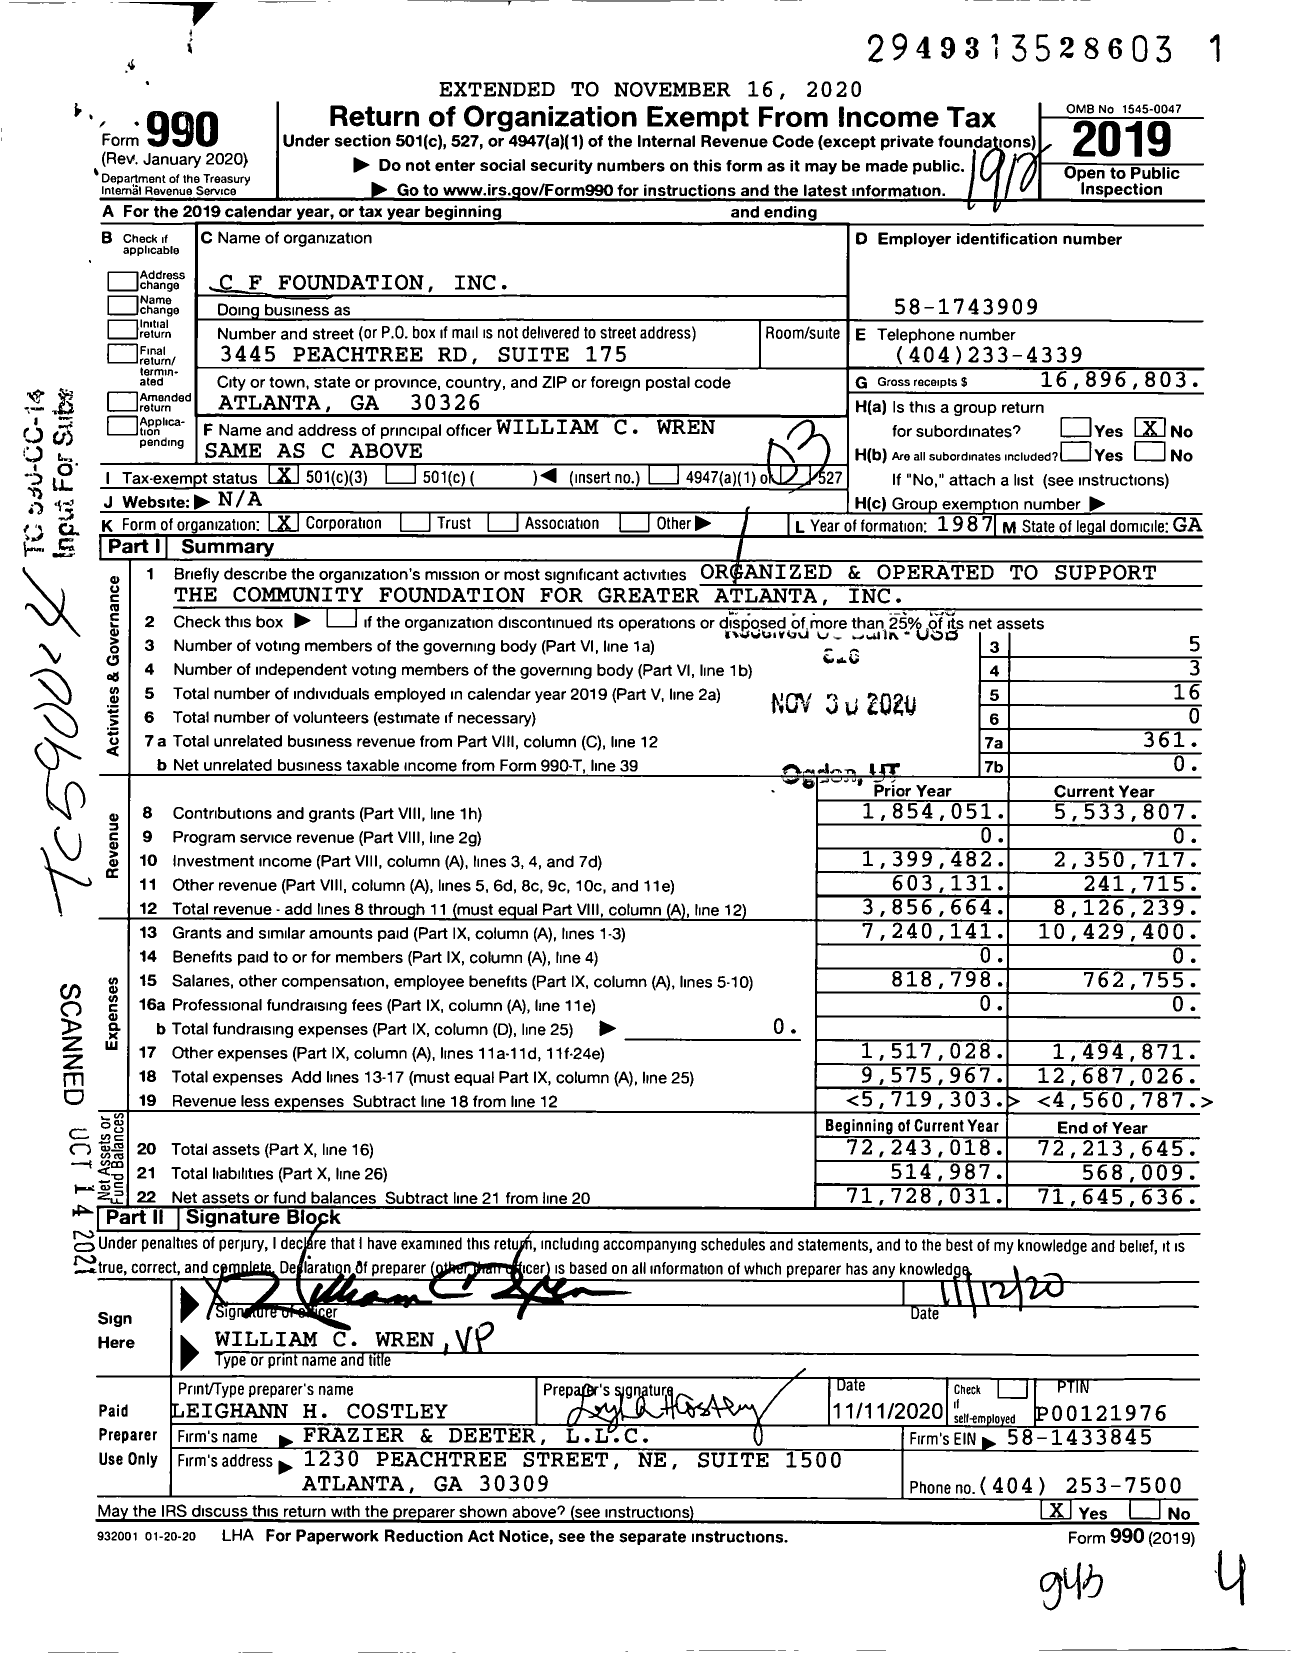 Image of first page of 2019 Form 990 for C F Foundation